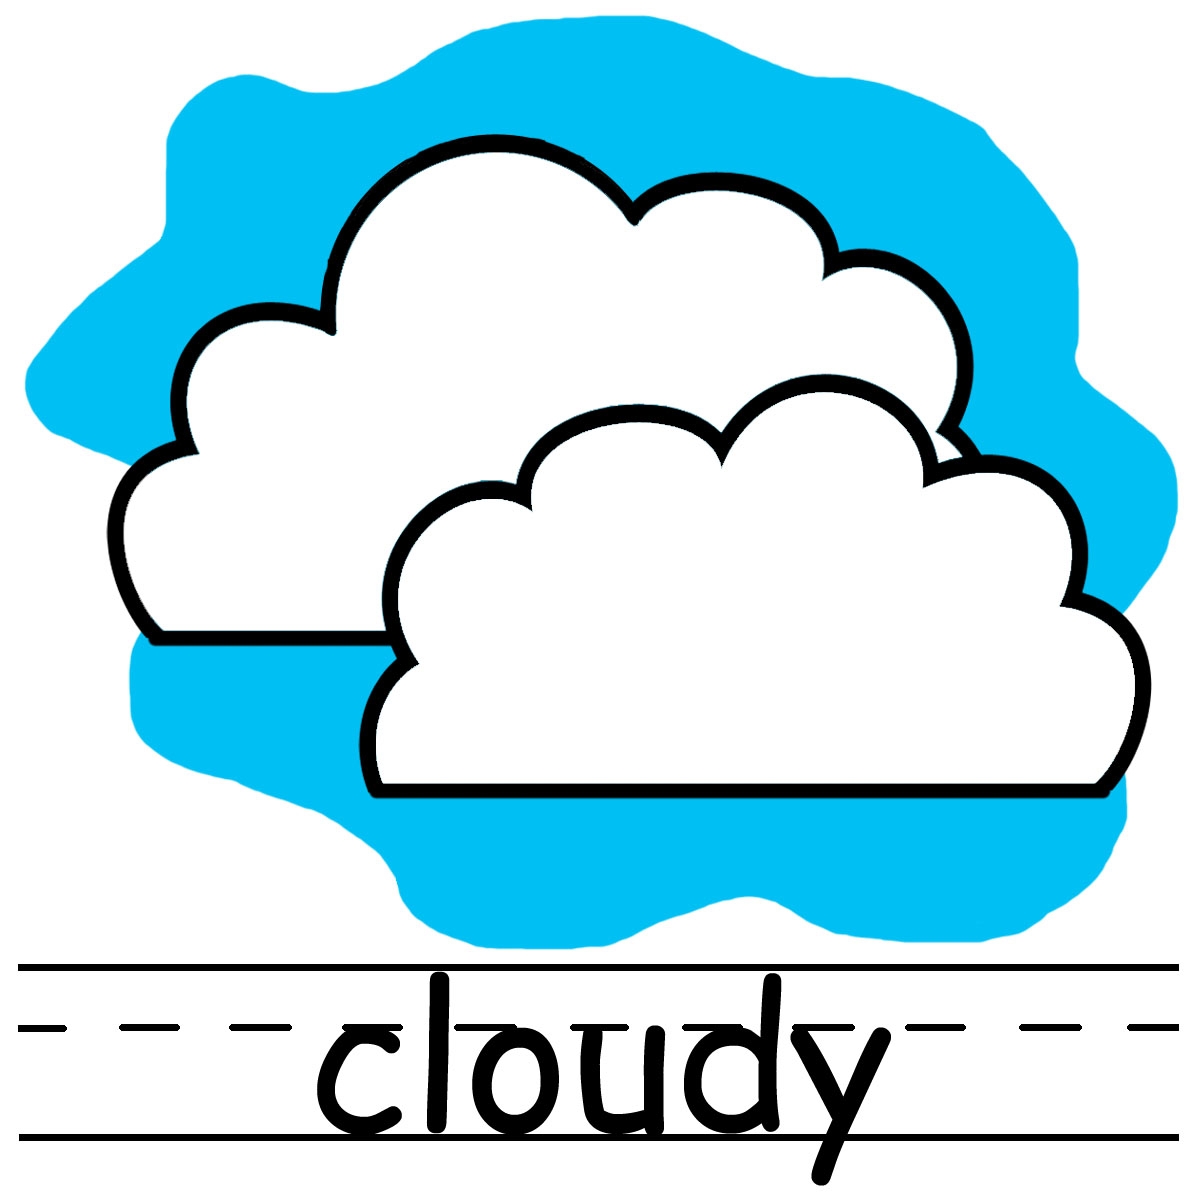 Gray cloudy clipart kid 2